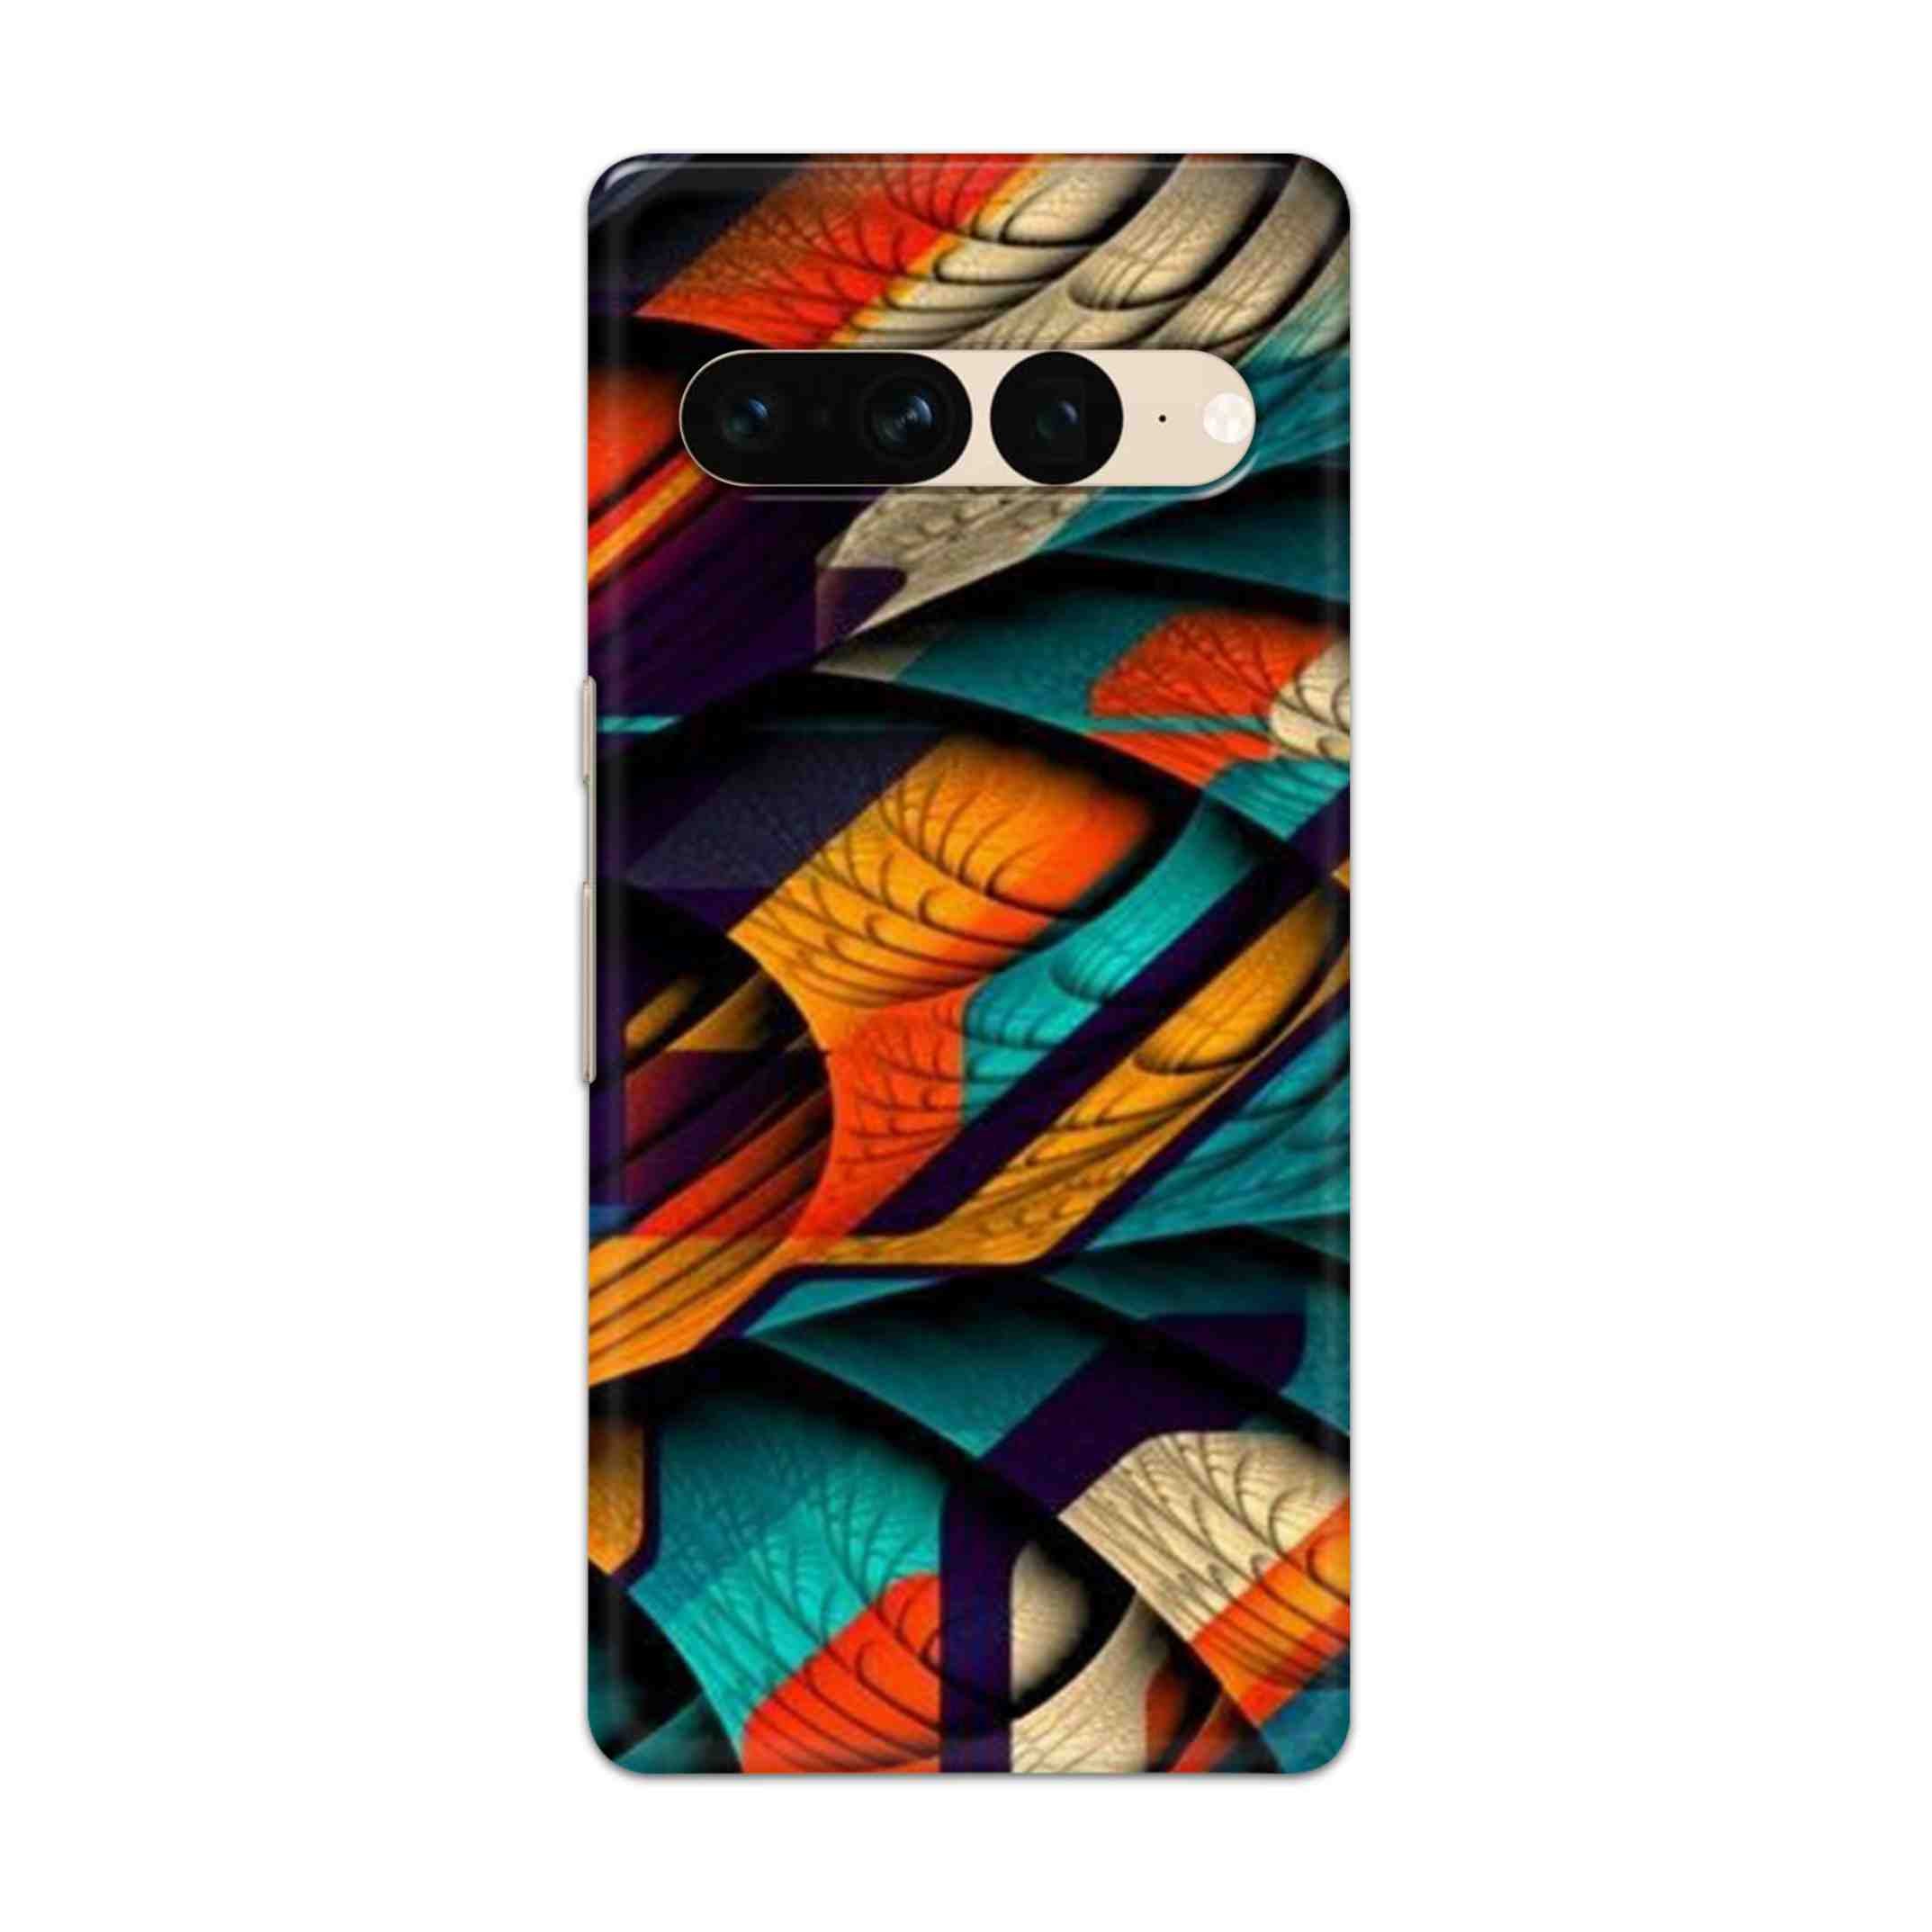 Buy Colour Abstract Hard Back Mobile Phone Case Cover For Google Pixel 7 Pro Online